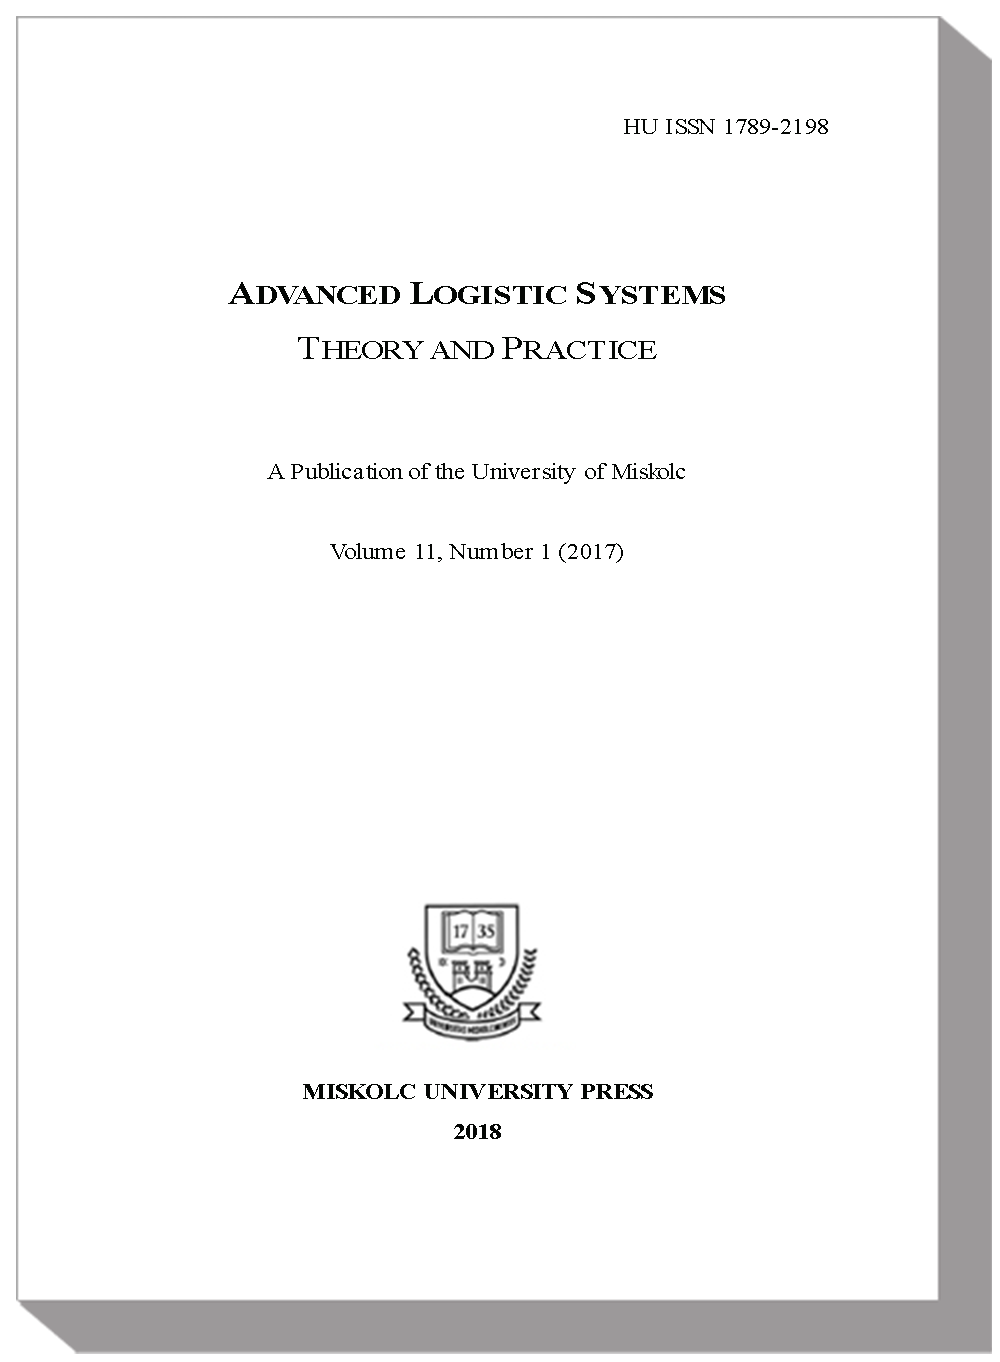 					View Vol. 11 No. 1 (2017): Advanced Logistic Systems - Theory and Practice
				